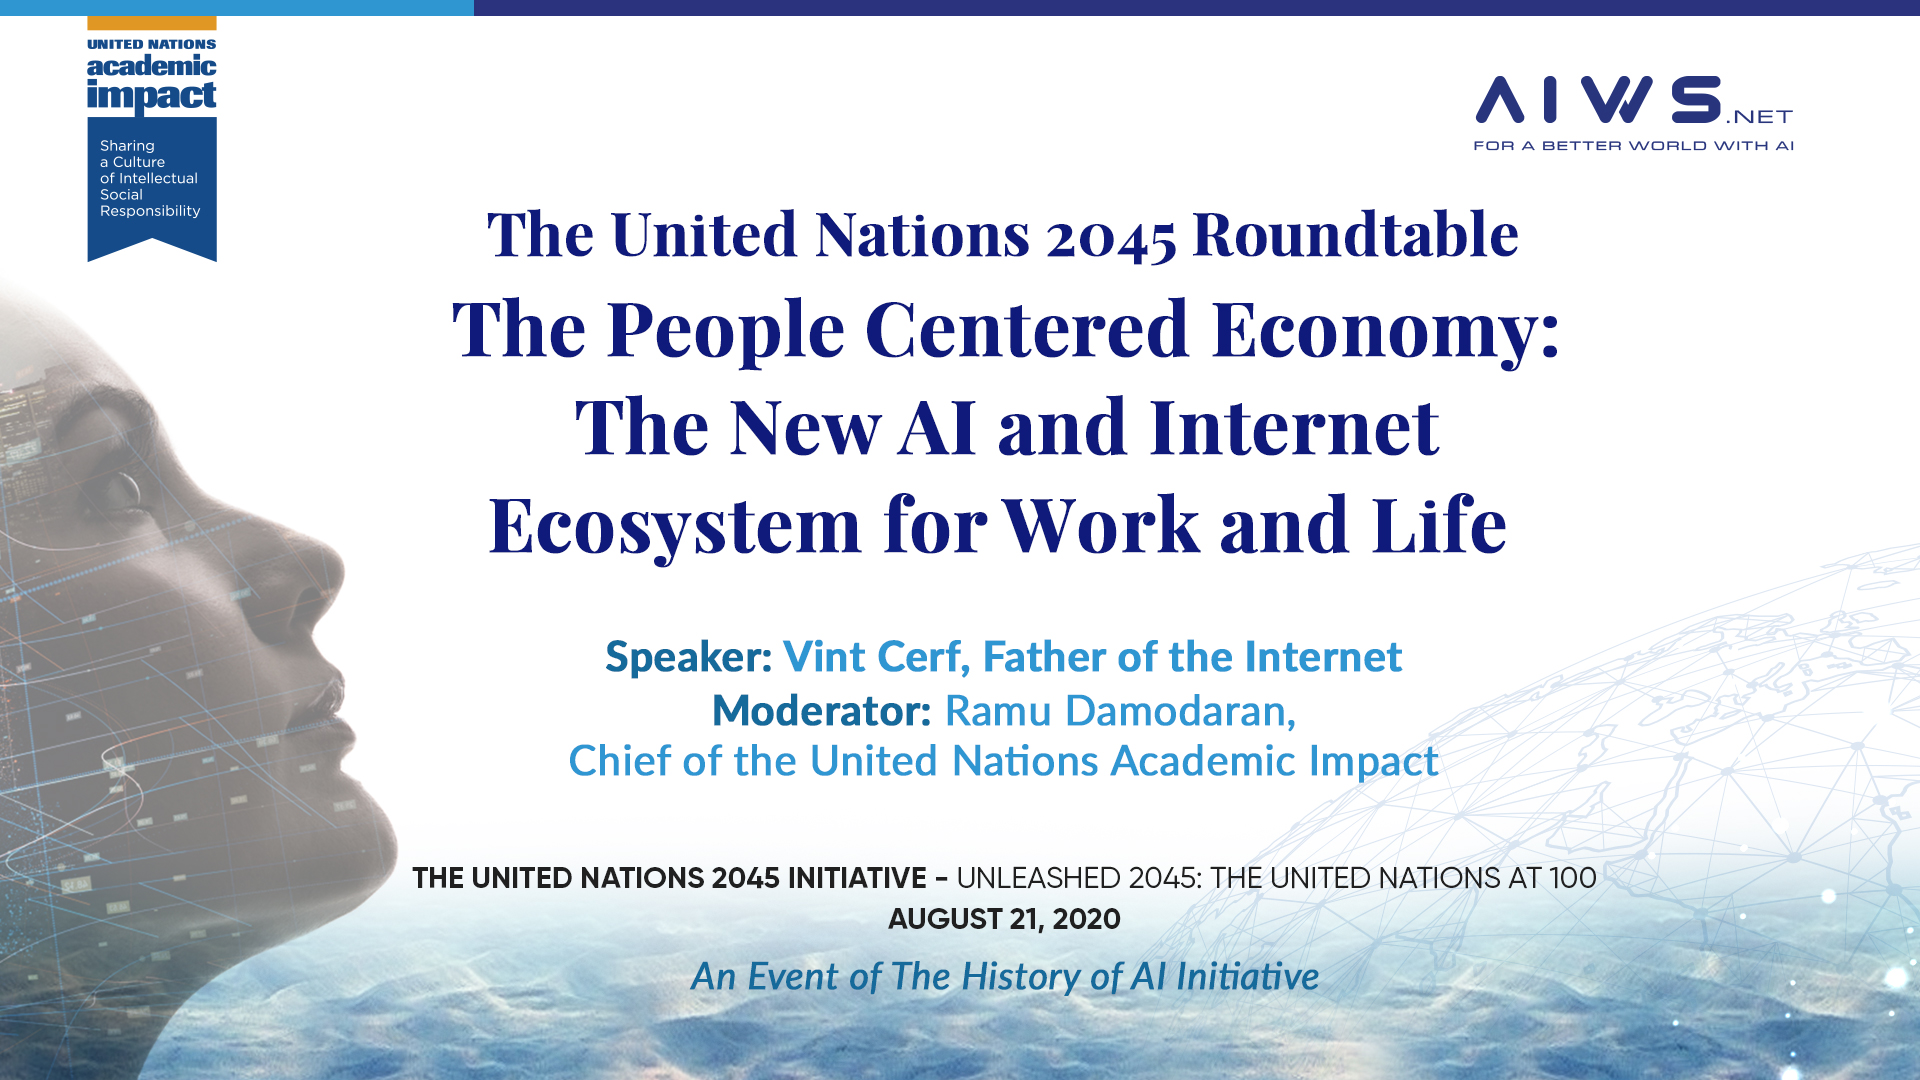 Father of the Internet Vint Cerf talks at UN Roundtable 2045